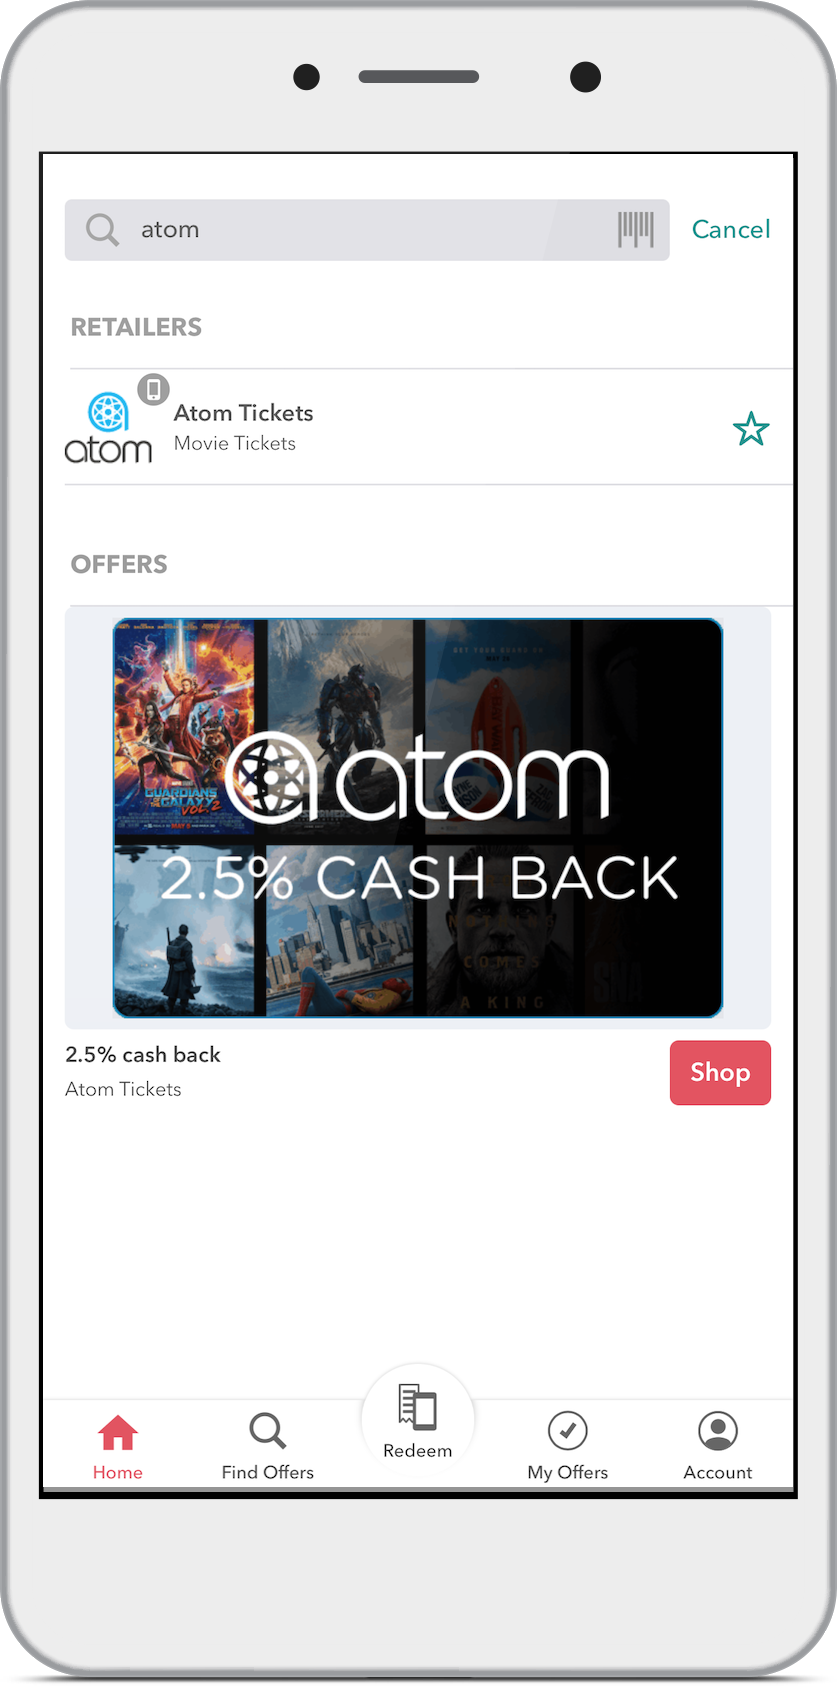 Planning a trip to the Movies? Start with Ibotta and earn real cashback at the Movie Theatre with Atom tickets. You can save even more on movie tickets!